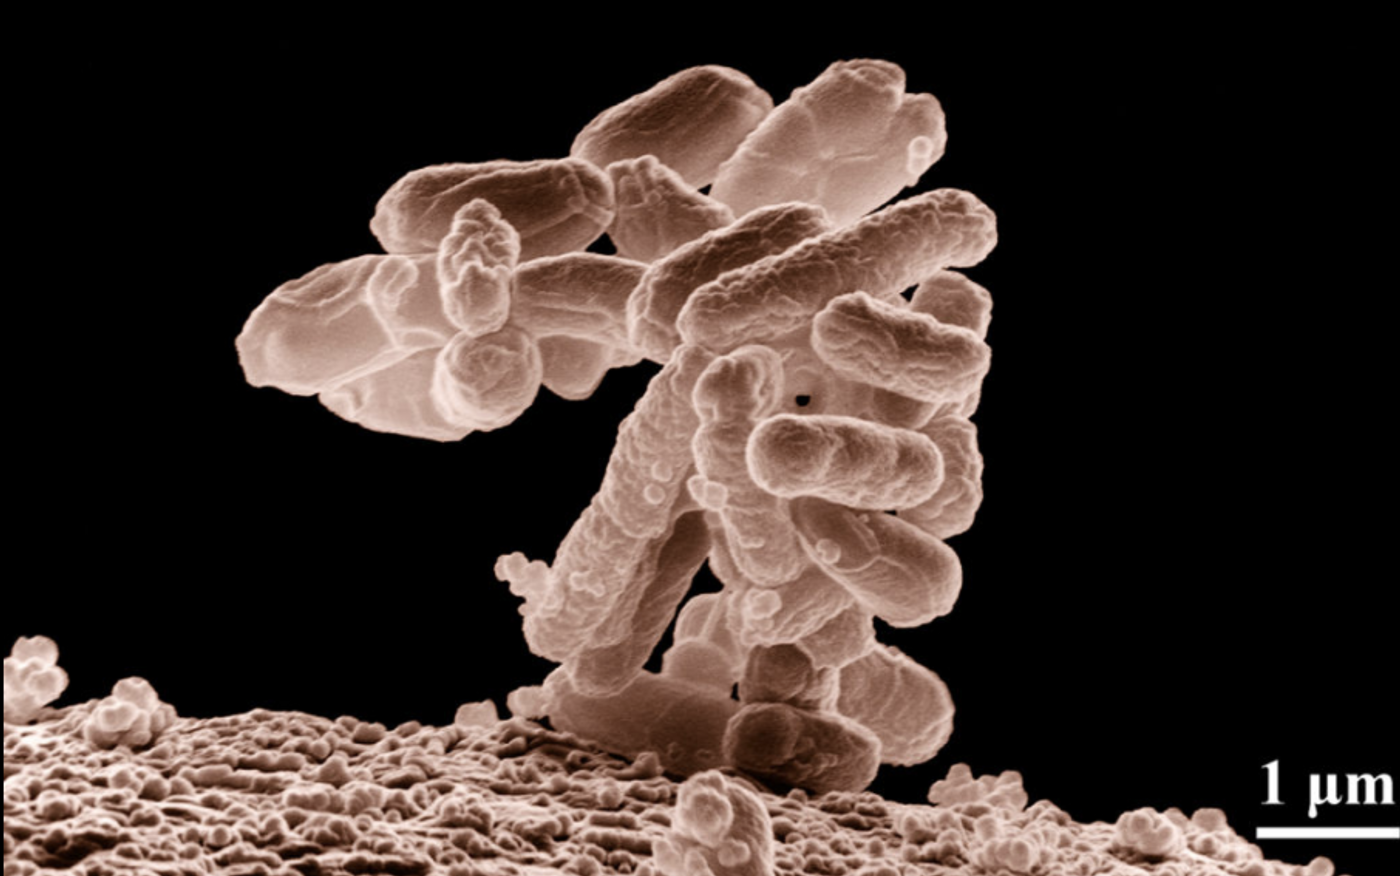 ow-temperature electron micrograph of a cluster of E. coli bacteria (a common intestinal bacterium), magnified 10,000 times. Each individual bacterium is oblong shaped./ Credit: United States Department of Agriculture.